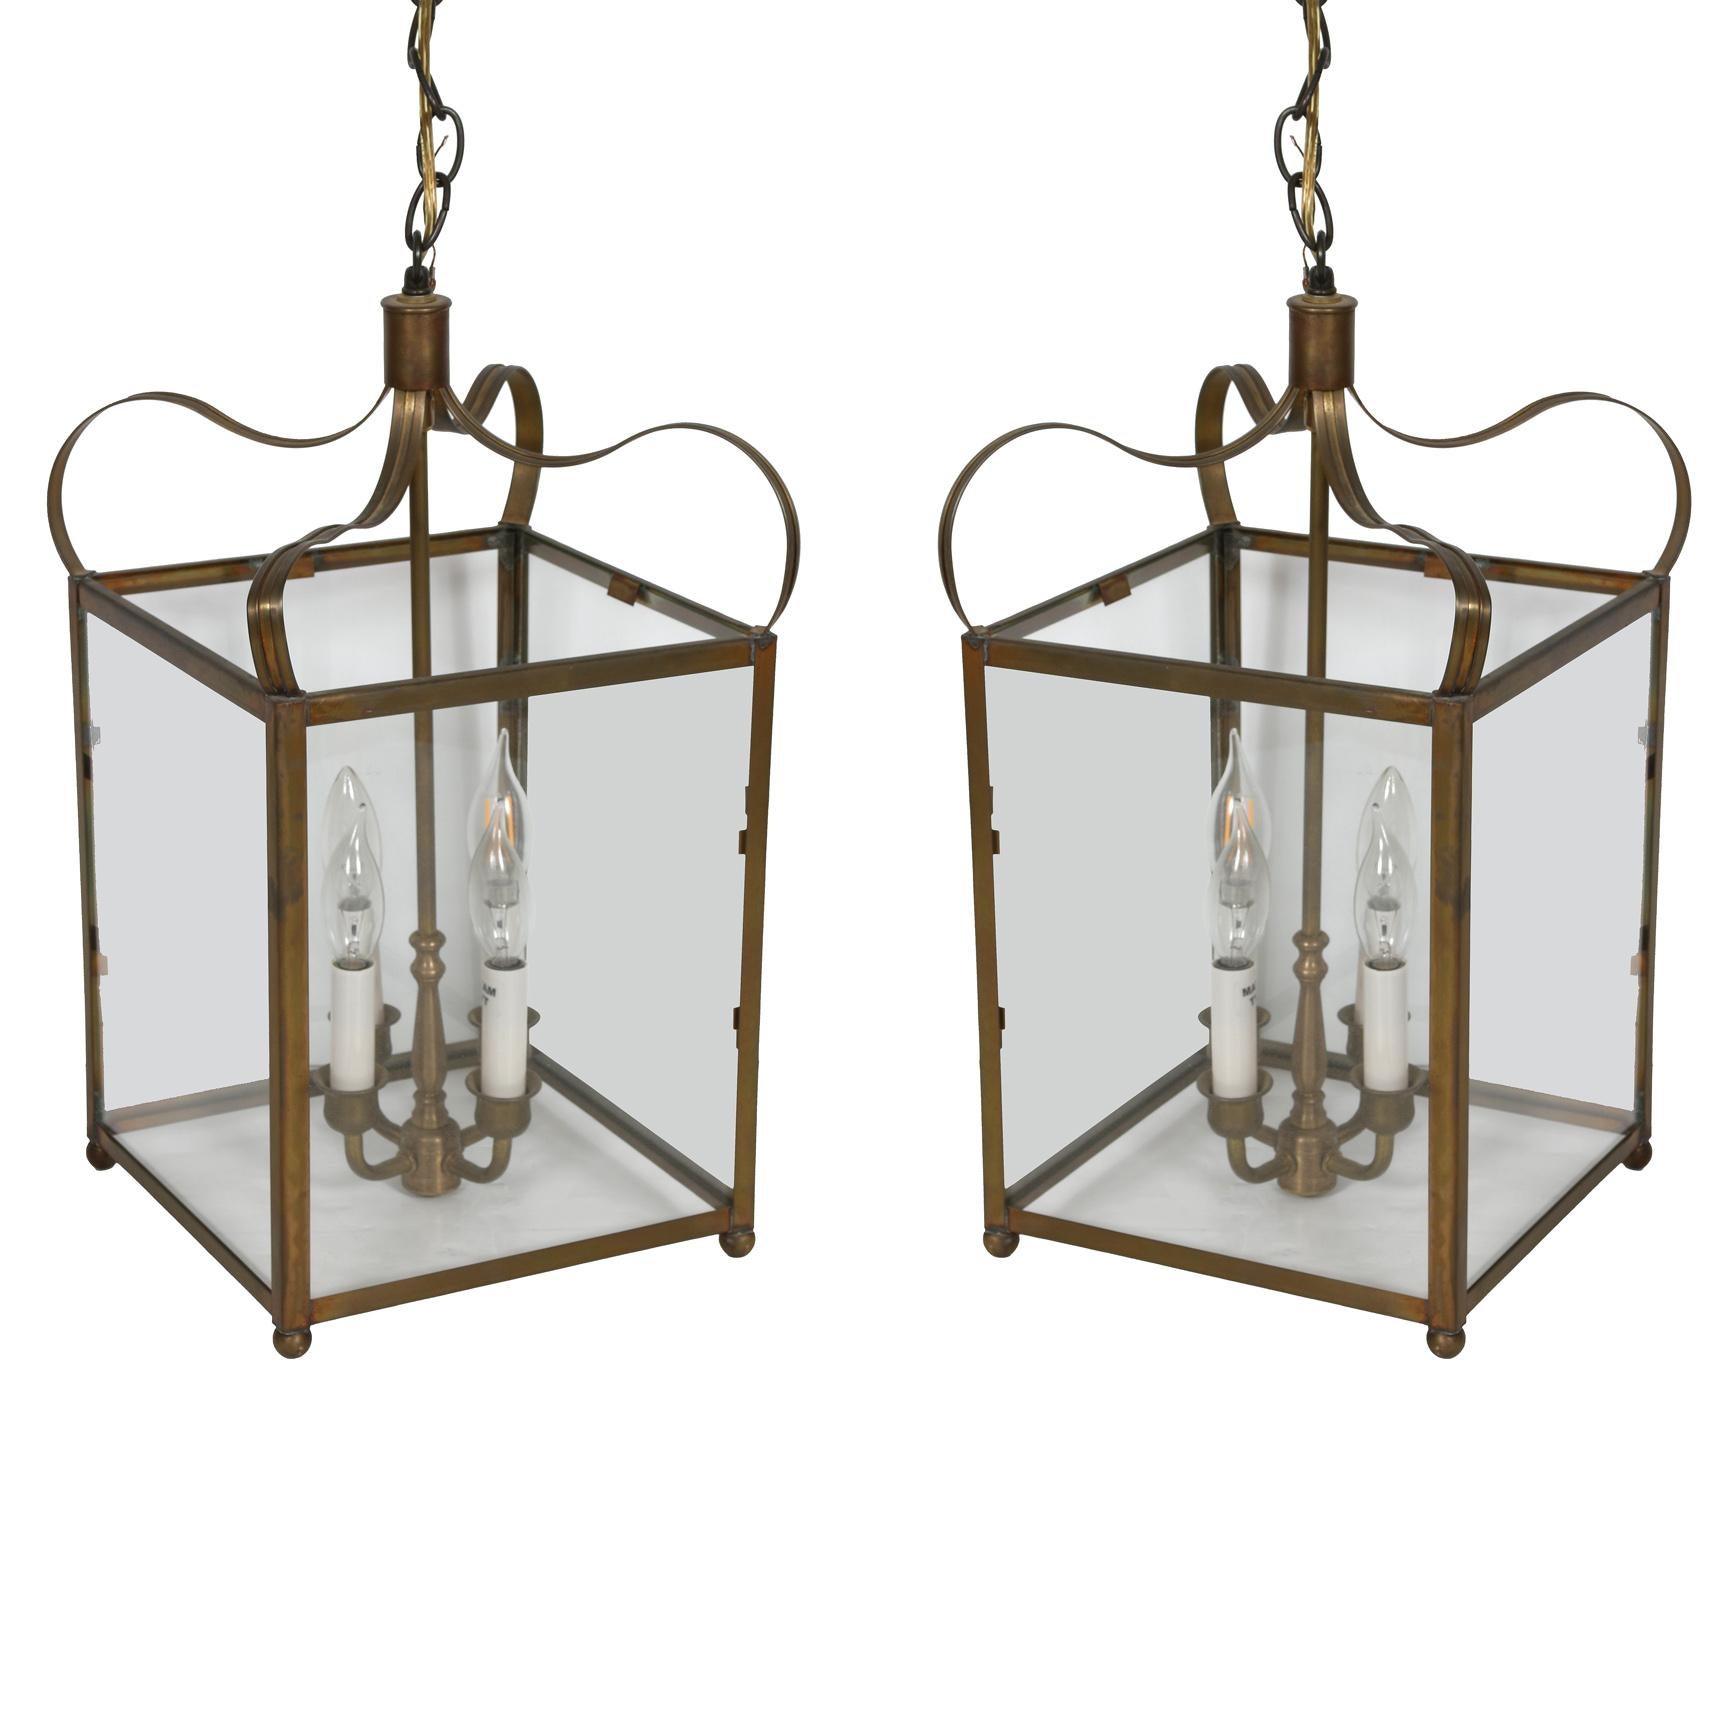 20th Century Pair of Vintage Brass Square Lanterns For Sale